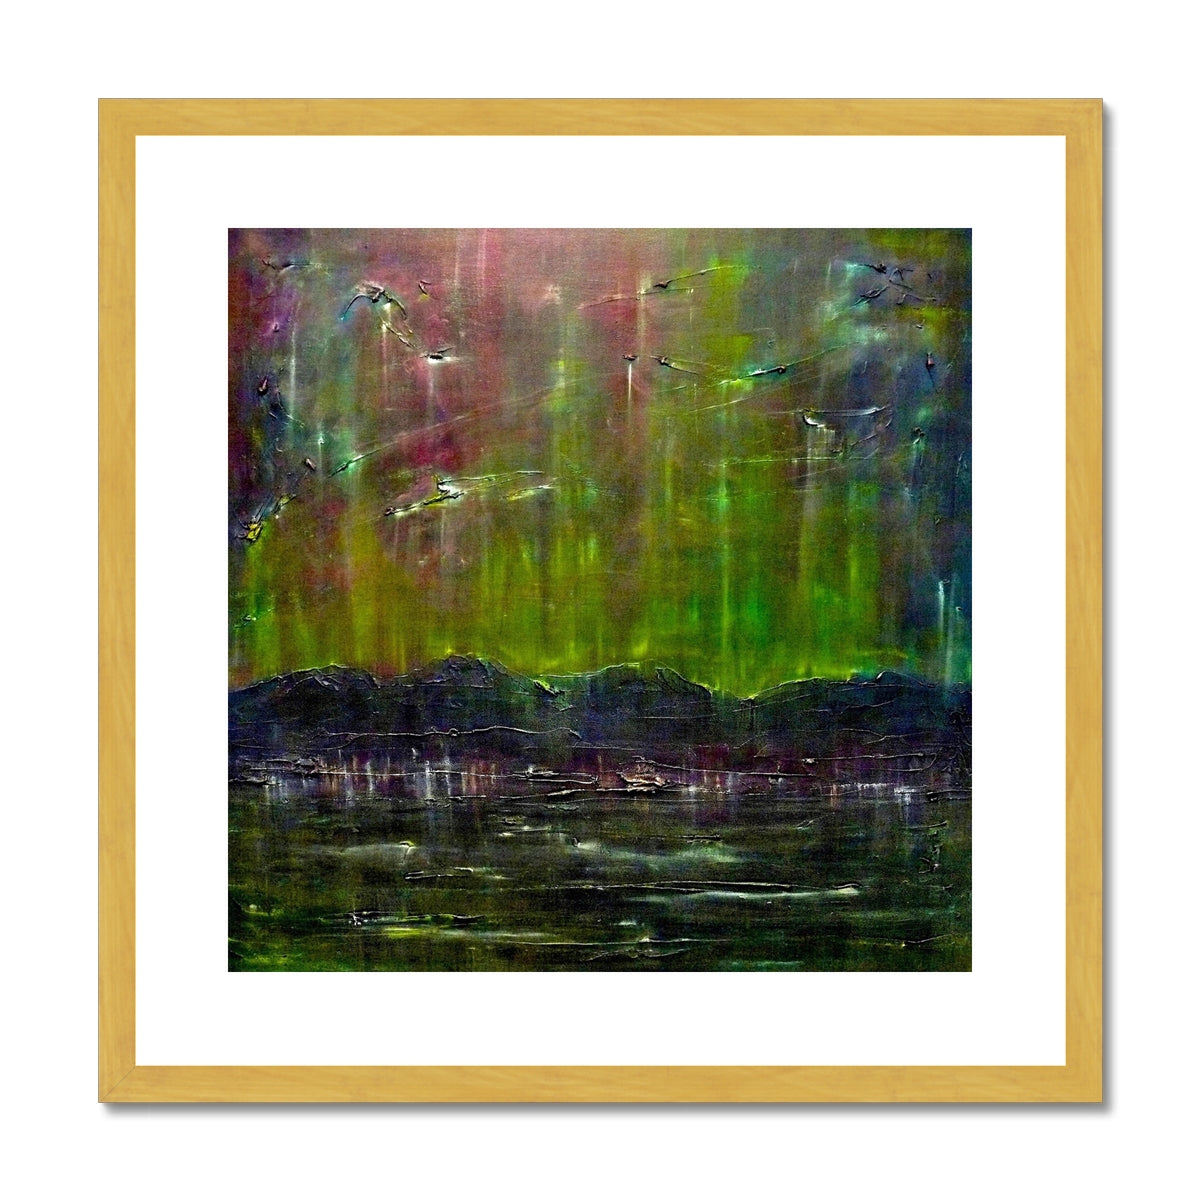 Cromarty Harbour Northern Lights Painting | Antique Framed & Mounted Prints From Scotland-Antique Framed & Mounted Prints-Scottish Highlands & Lowlands Art Gallery-20"x20"-Gold Frame-Paintings, Prints, Homeware, Art Gifts From Scotland By Scottish Artist Kevin Hunter